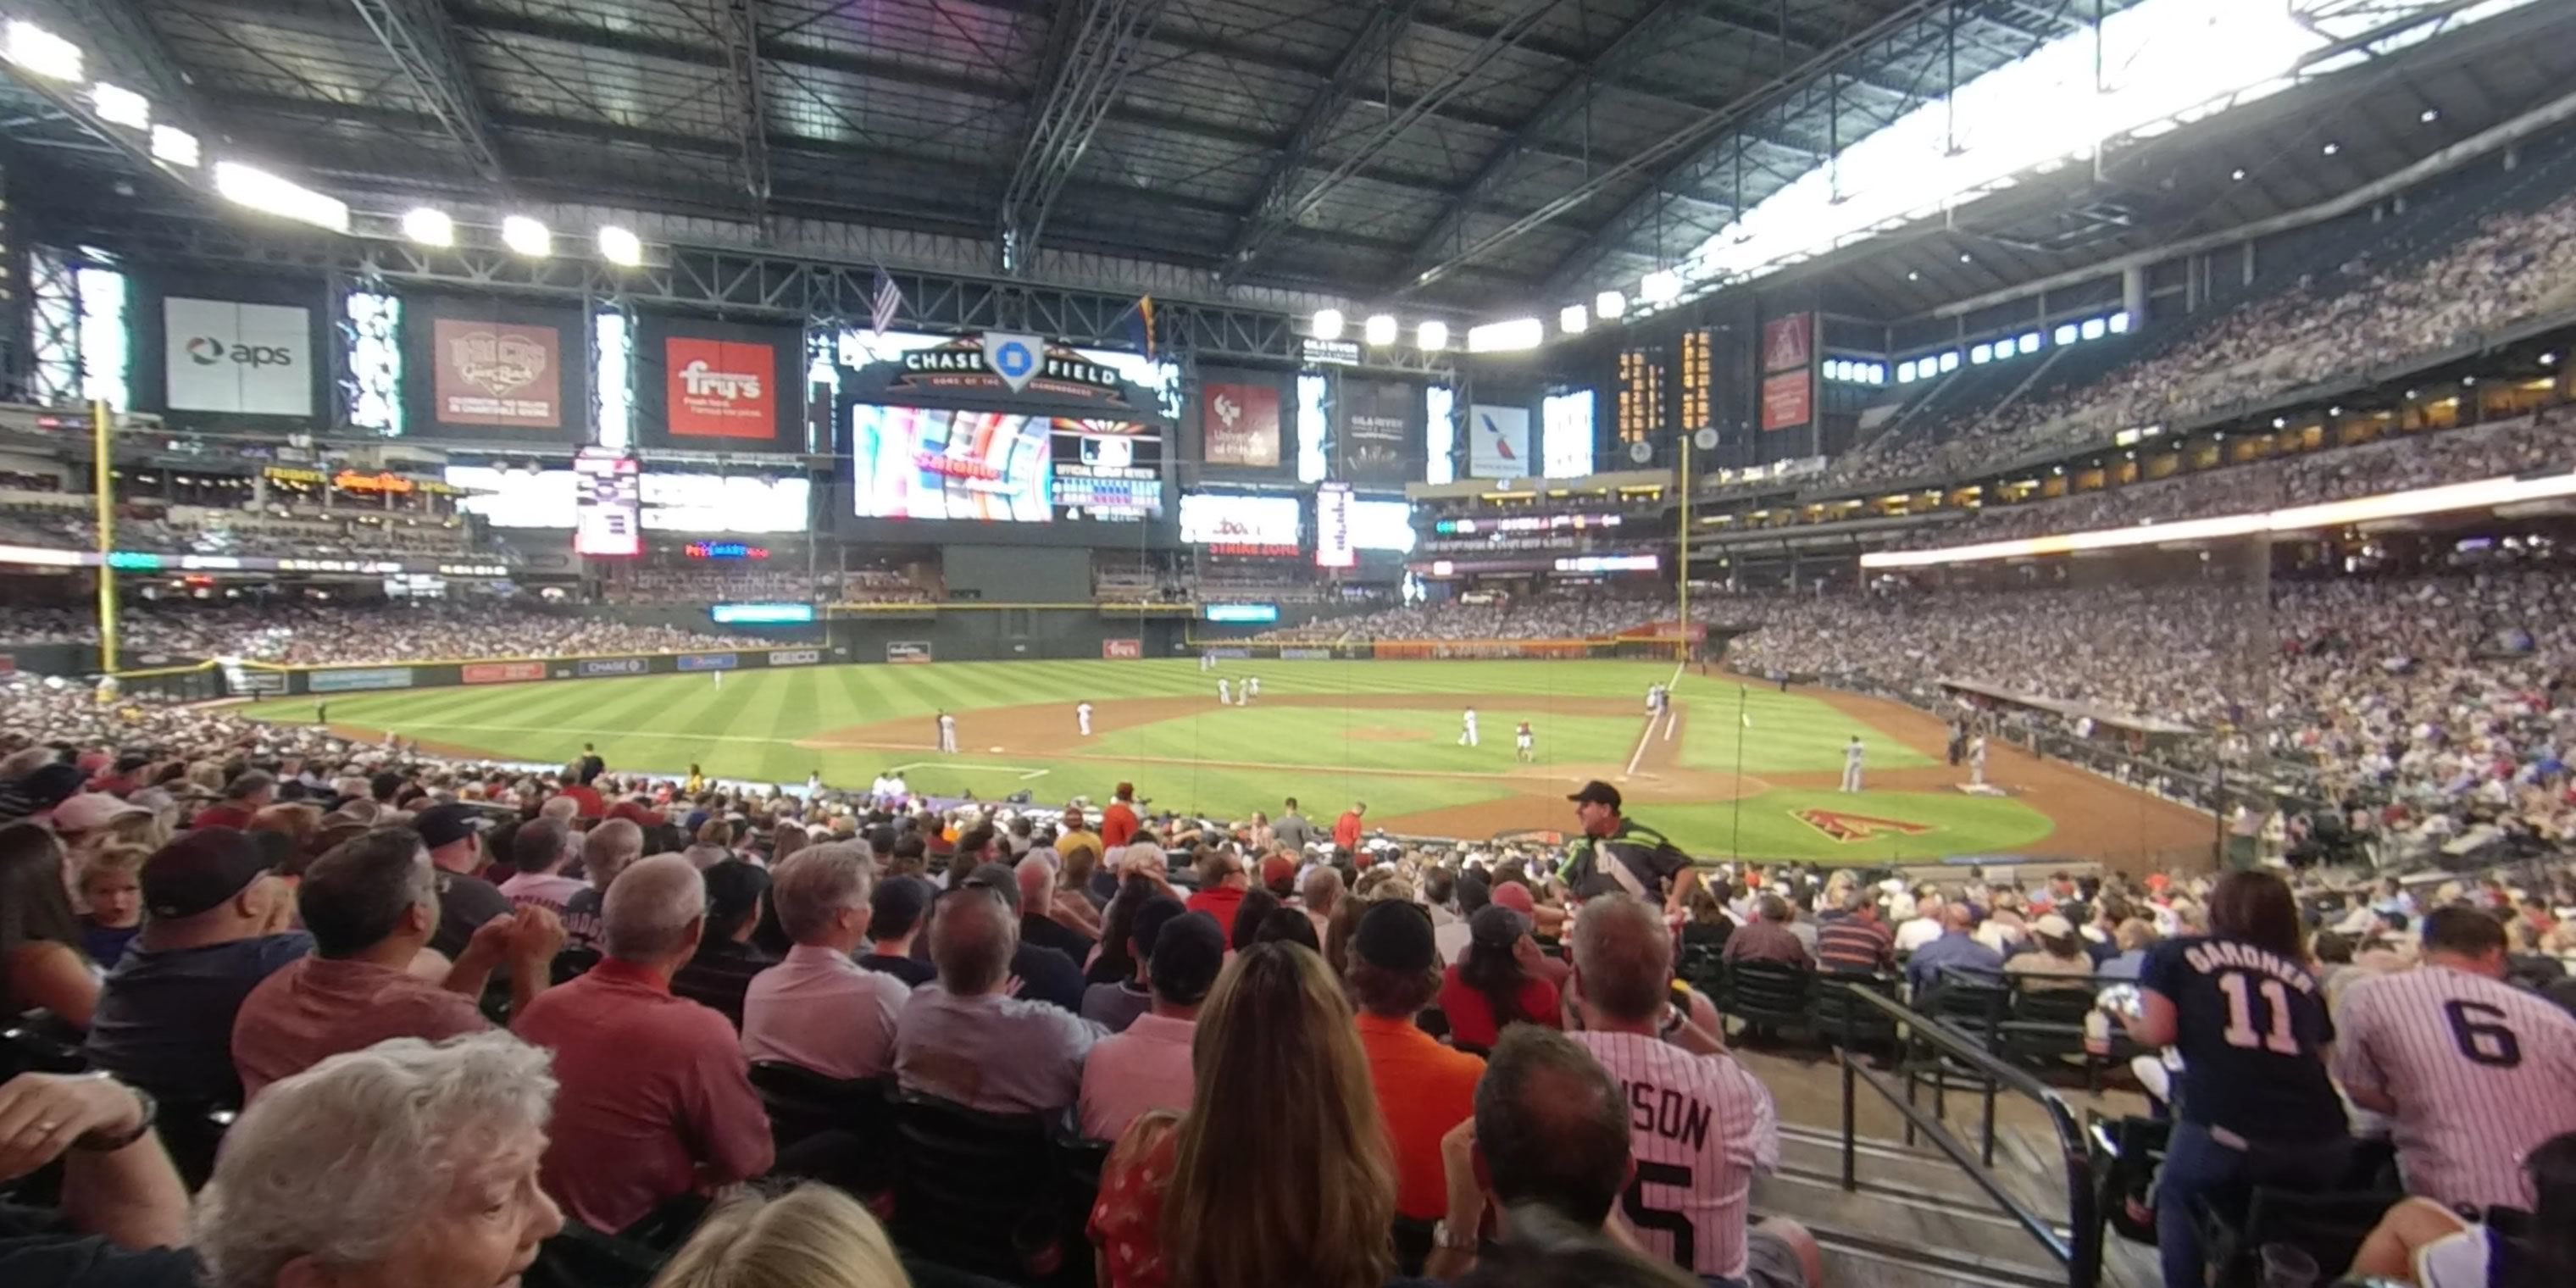 section 125 panoramic seat view  for baseball - chase field